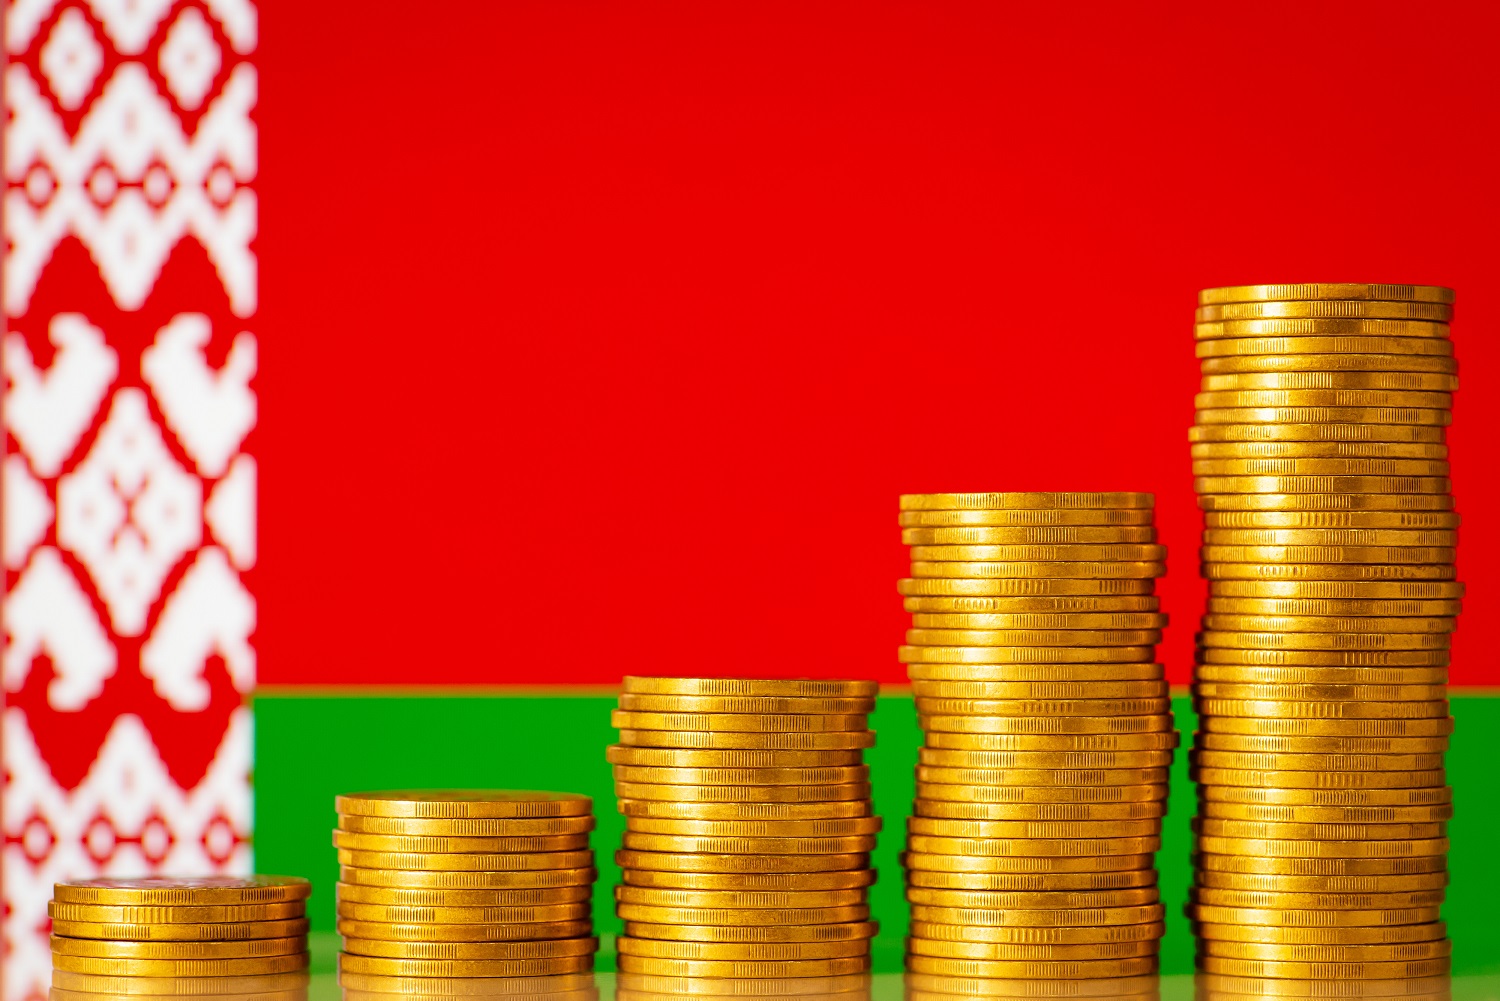 Stacks of metal coins against the backdrop of the flag of Belarus.